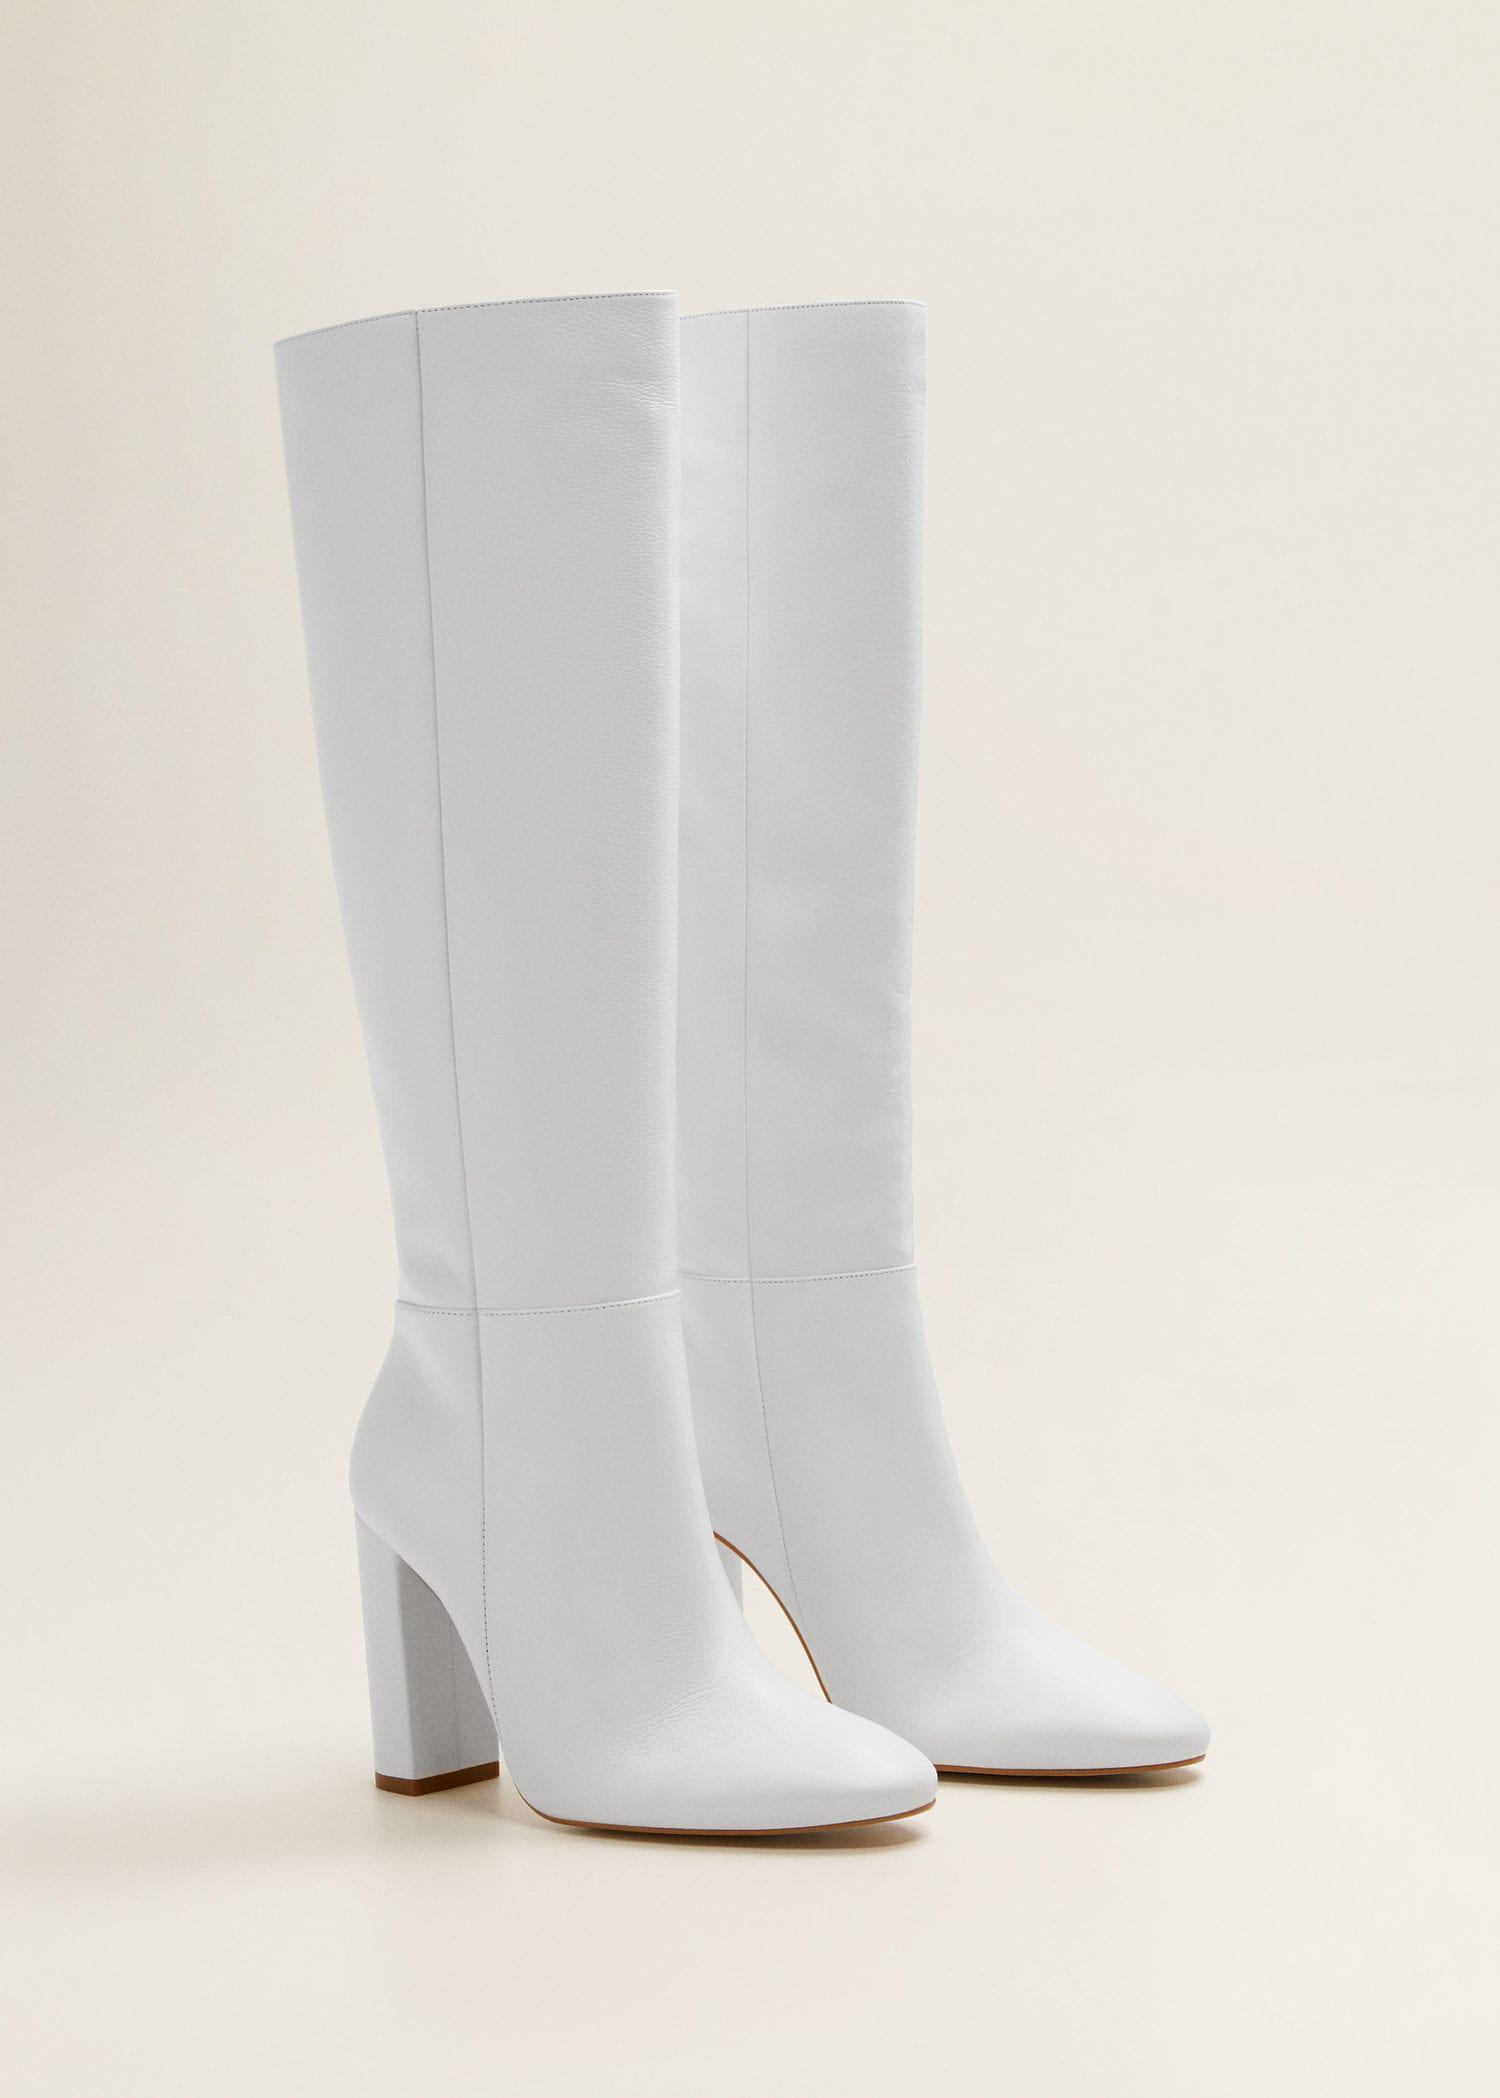 Mango Leather High-leg Boots in White - Lyst